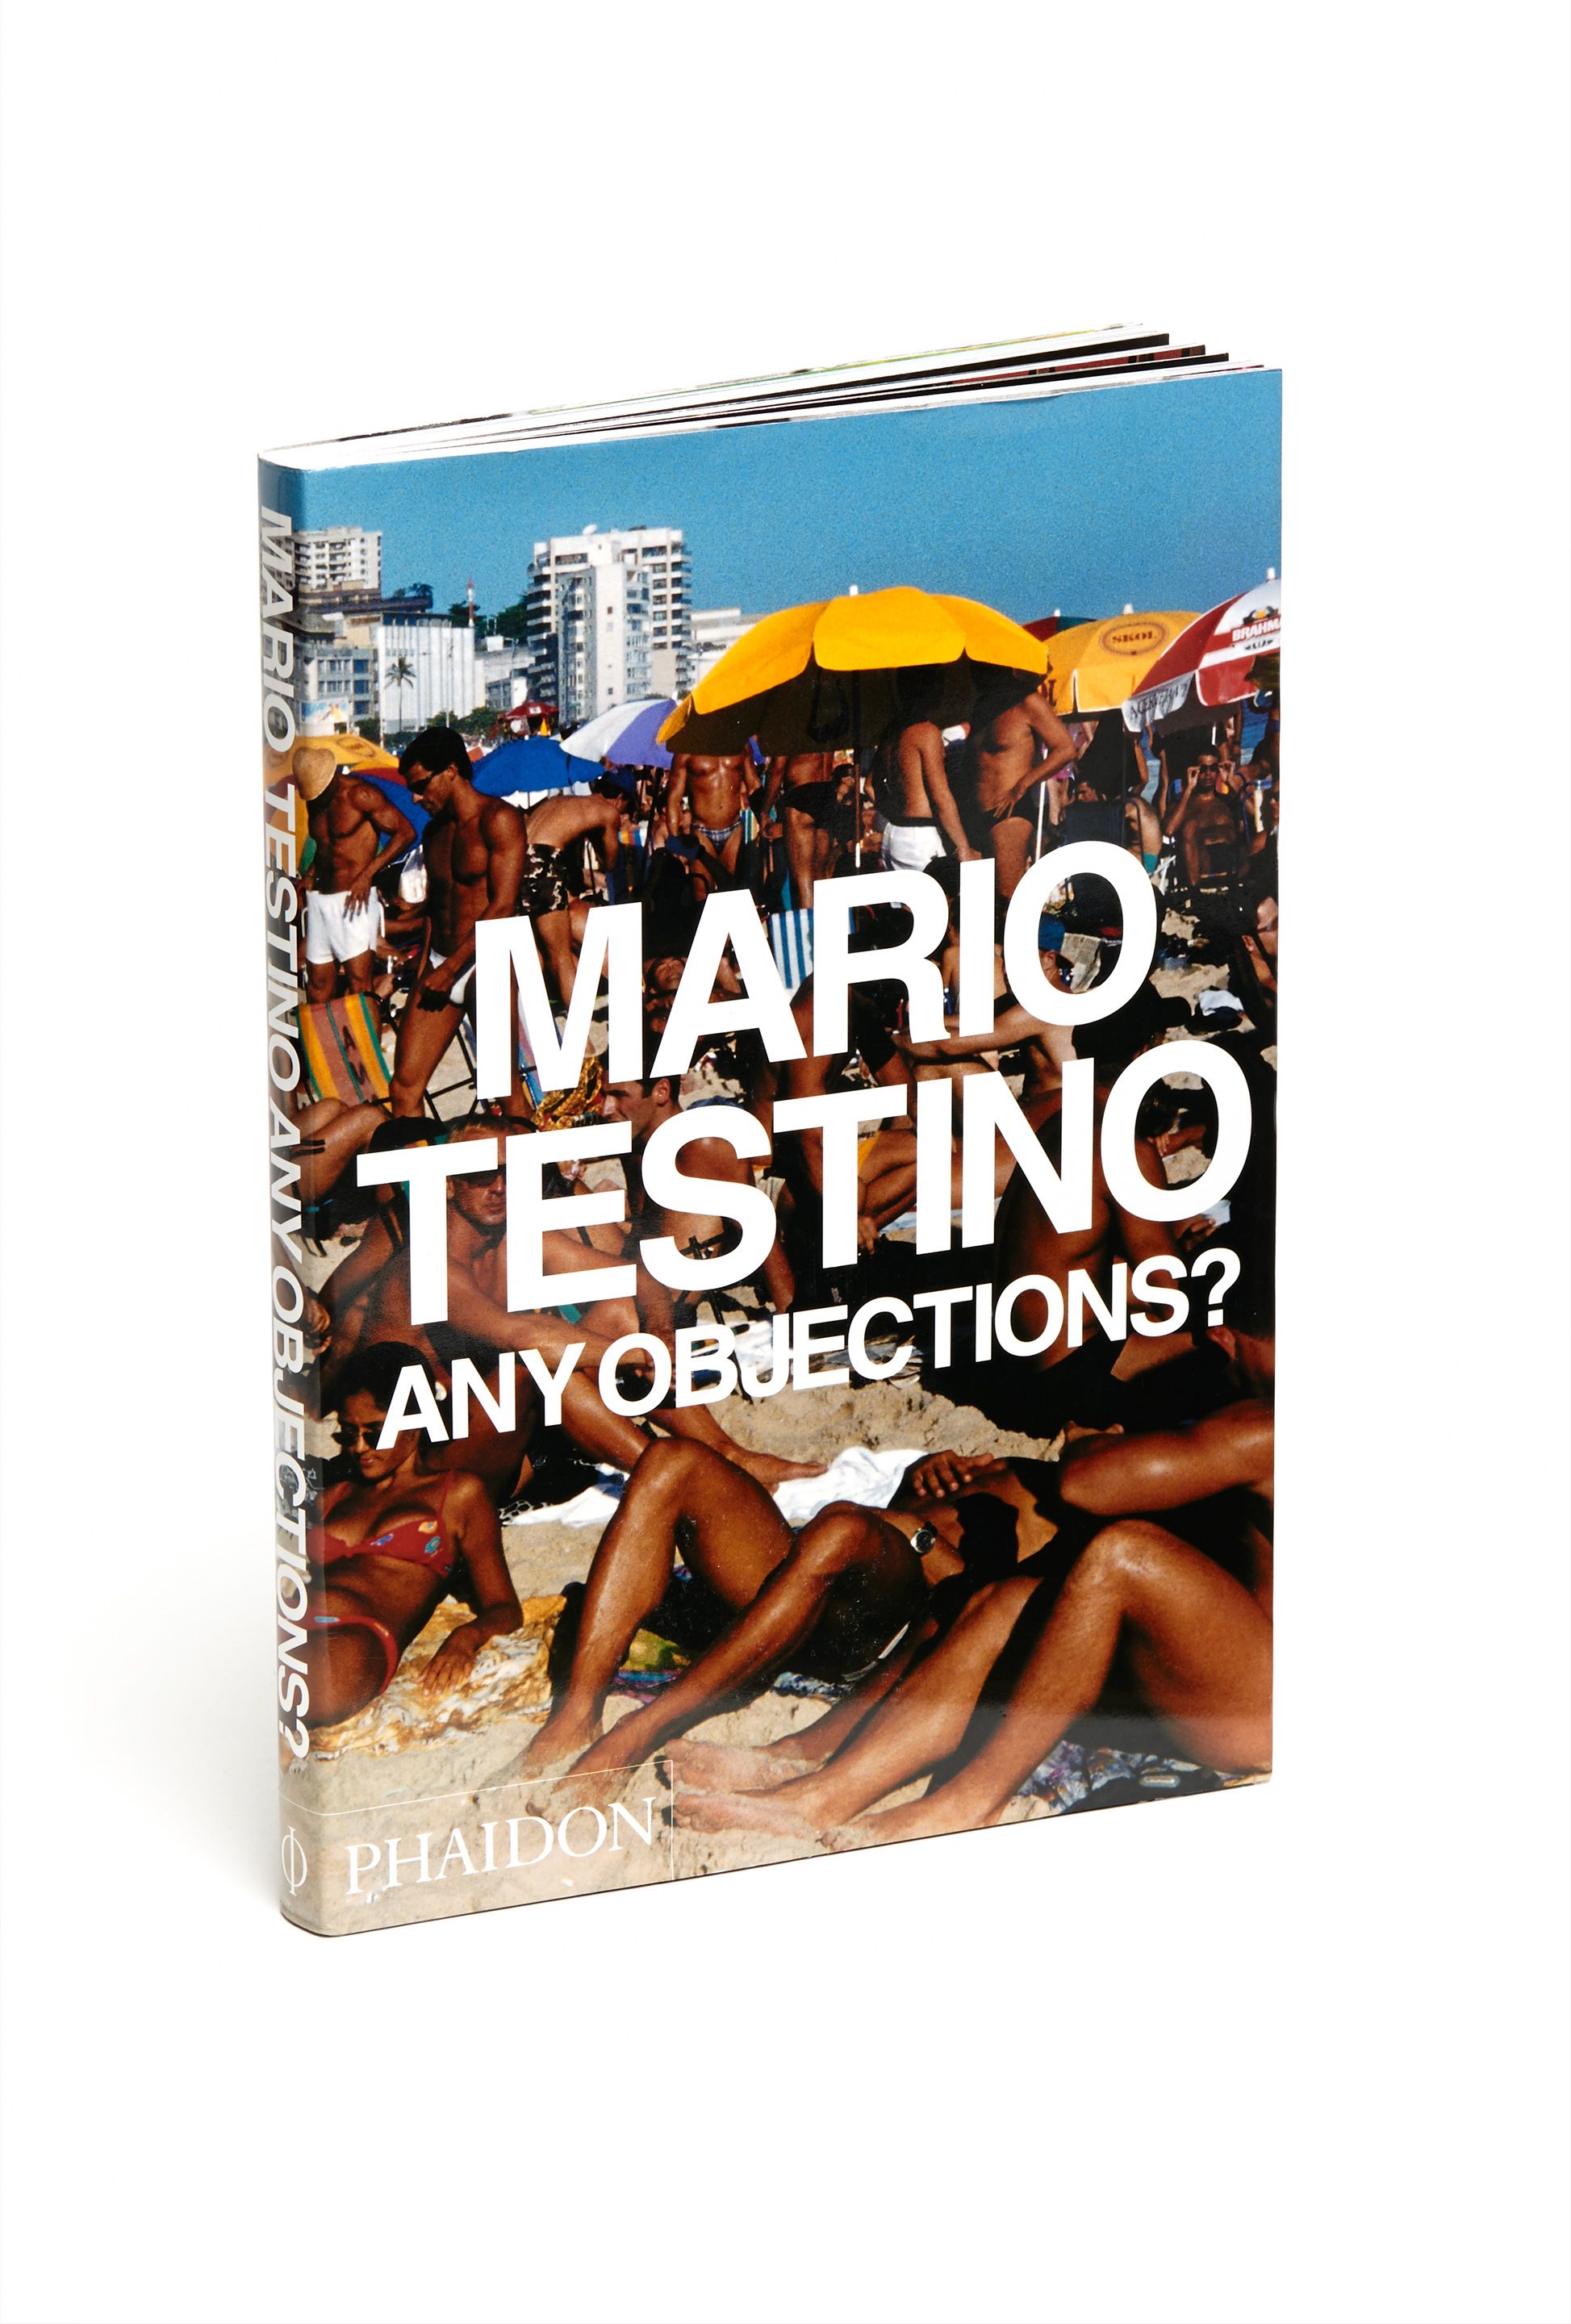 Any Objections?, book by Mario Testino